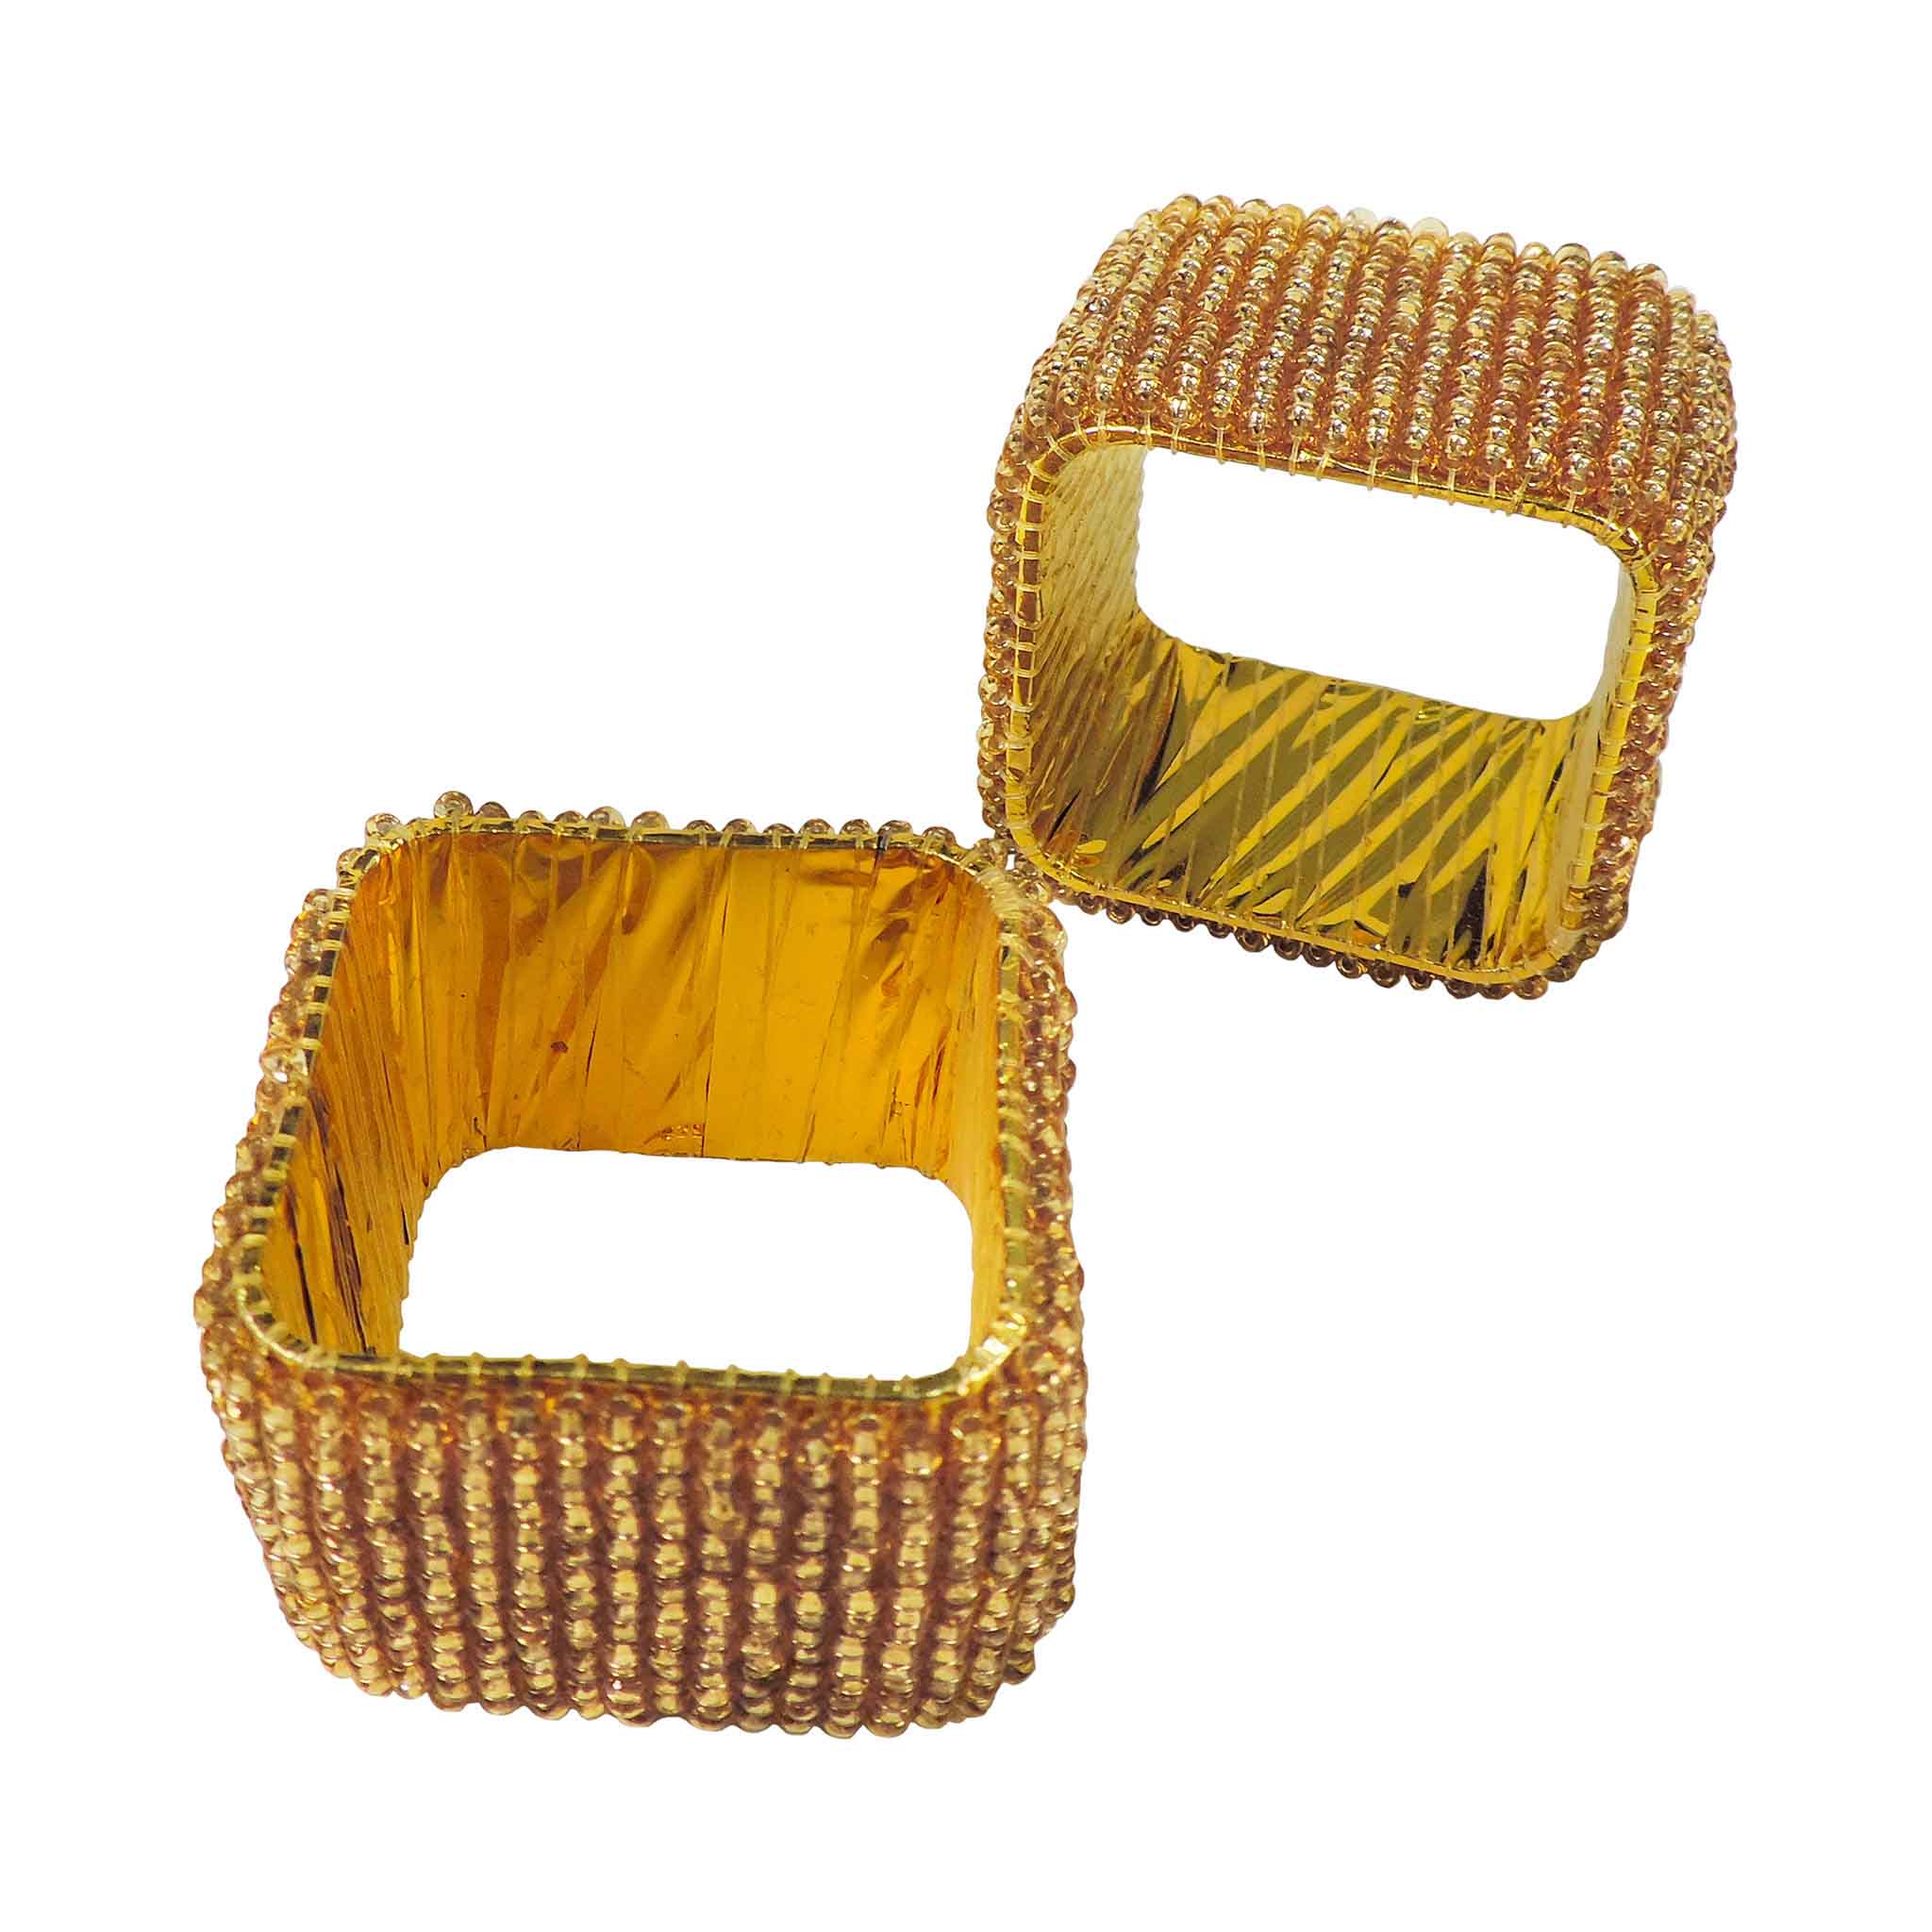 Classic Square Napkin Rings / Set of 4 / Gold